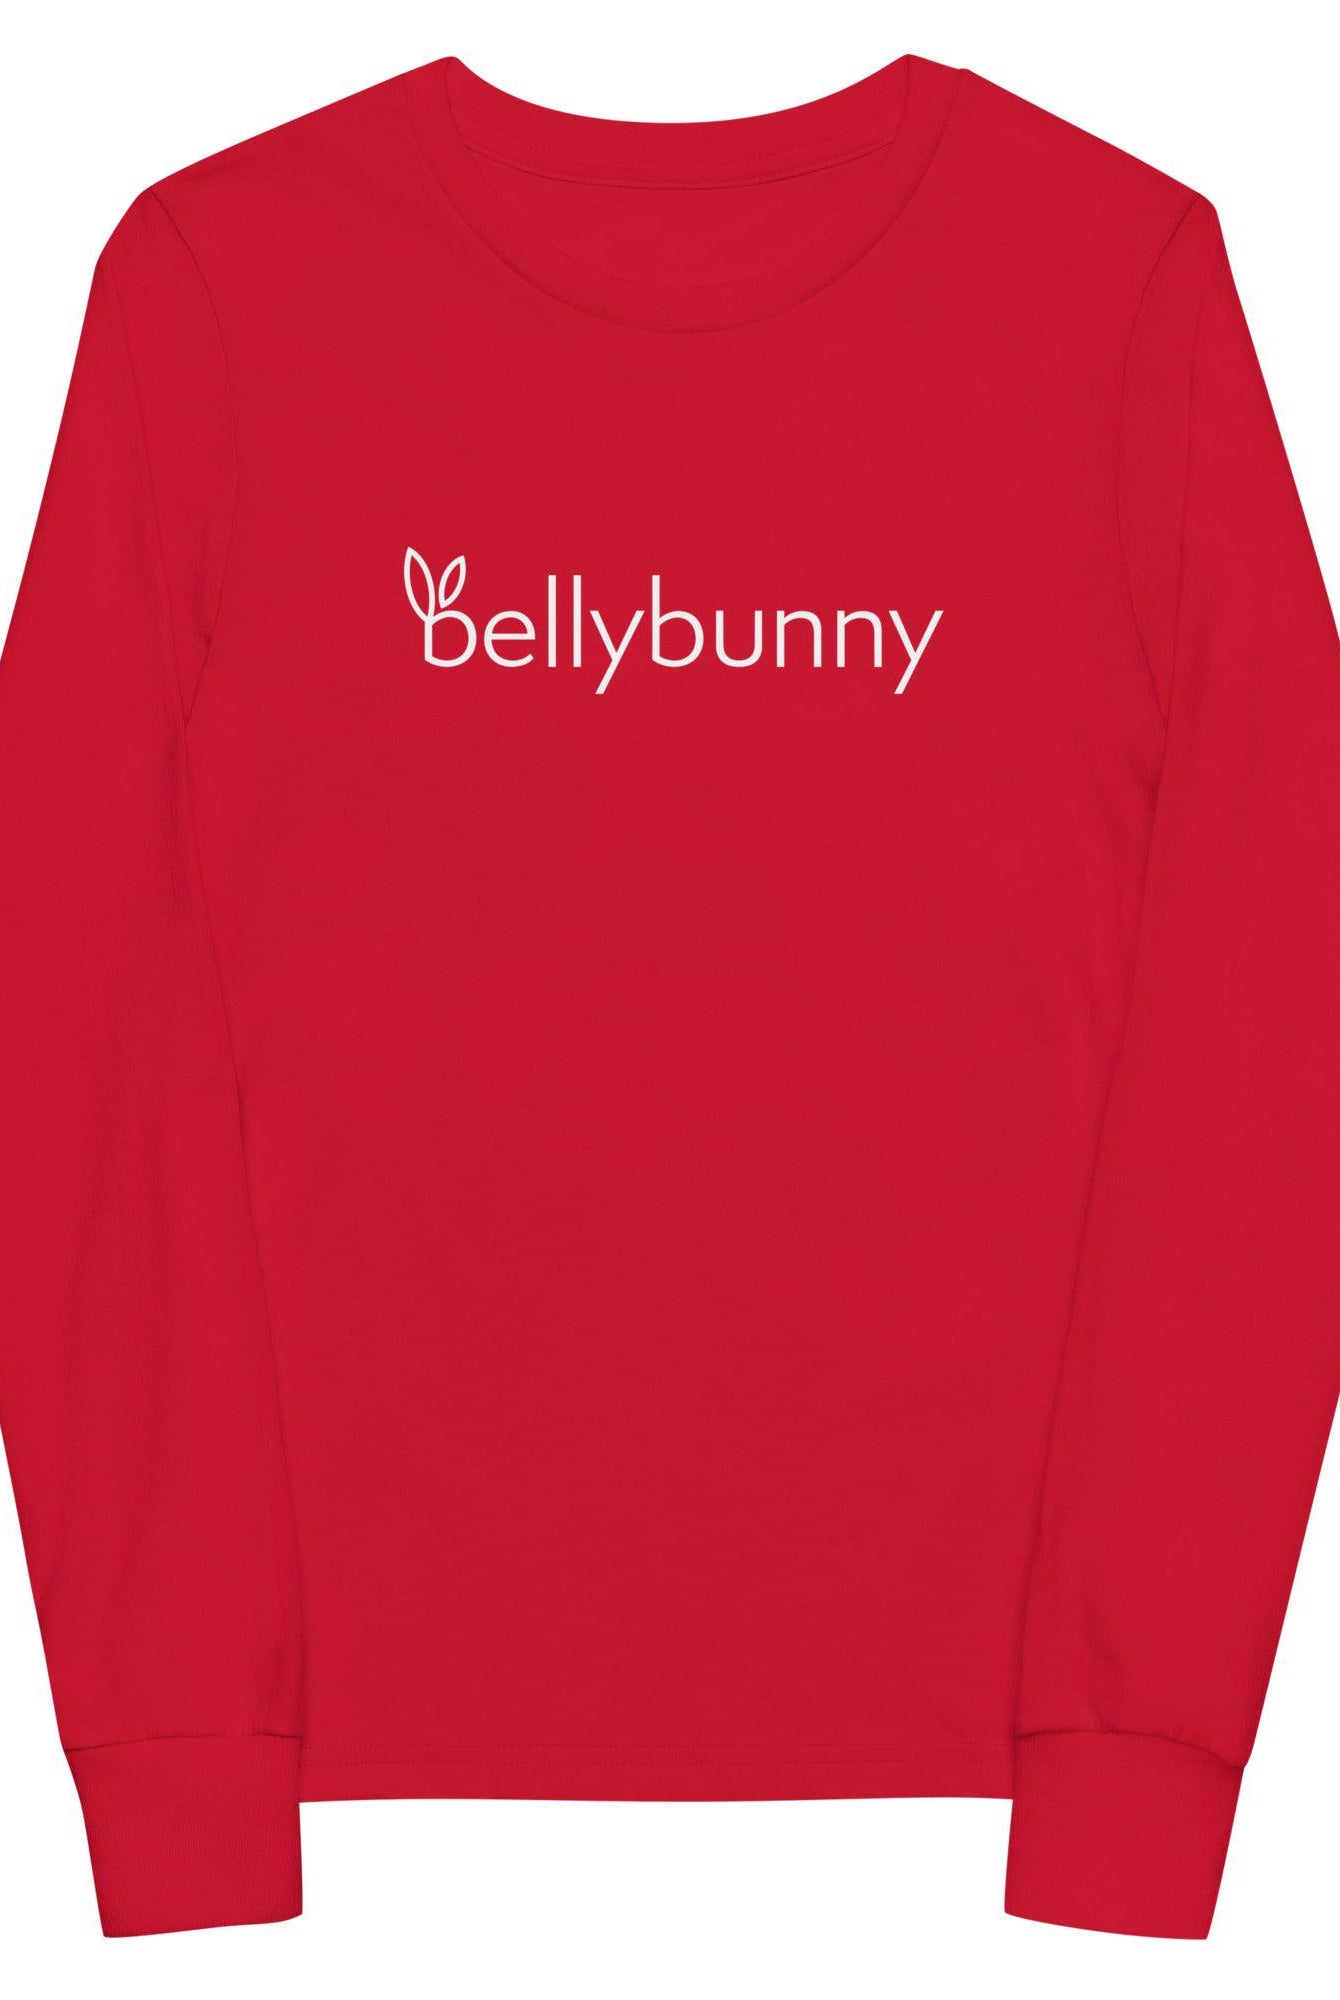 Bellybunny-Youth Long Sleeve T-Shirt-Red-white logo